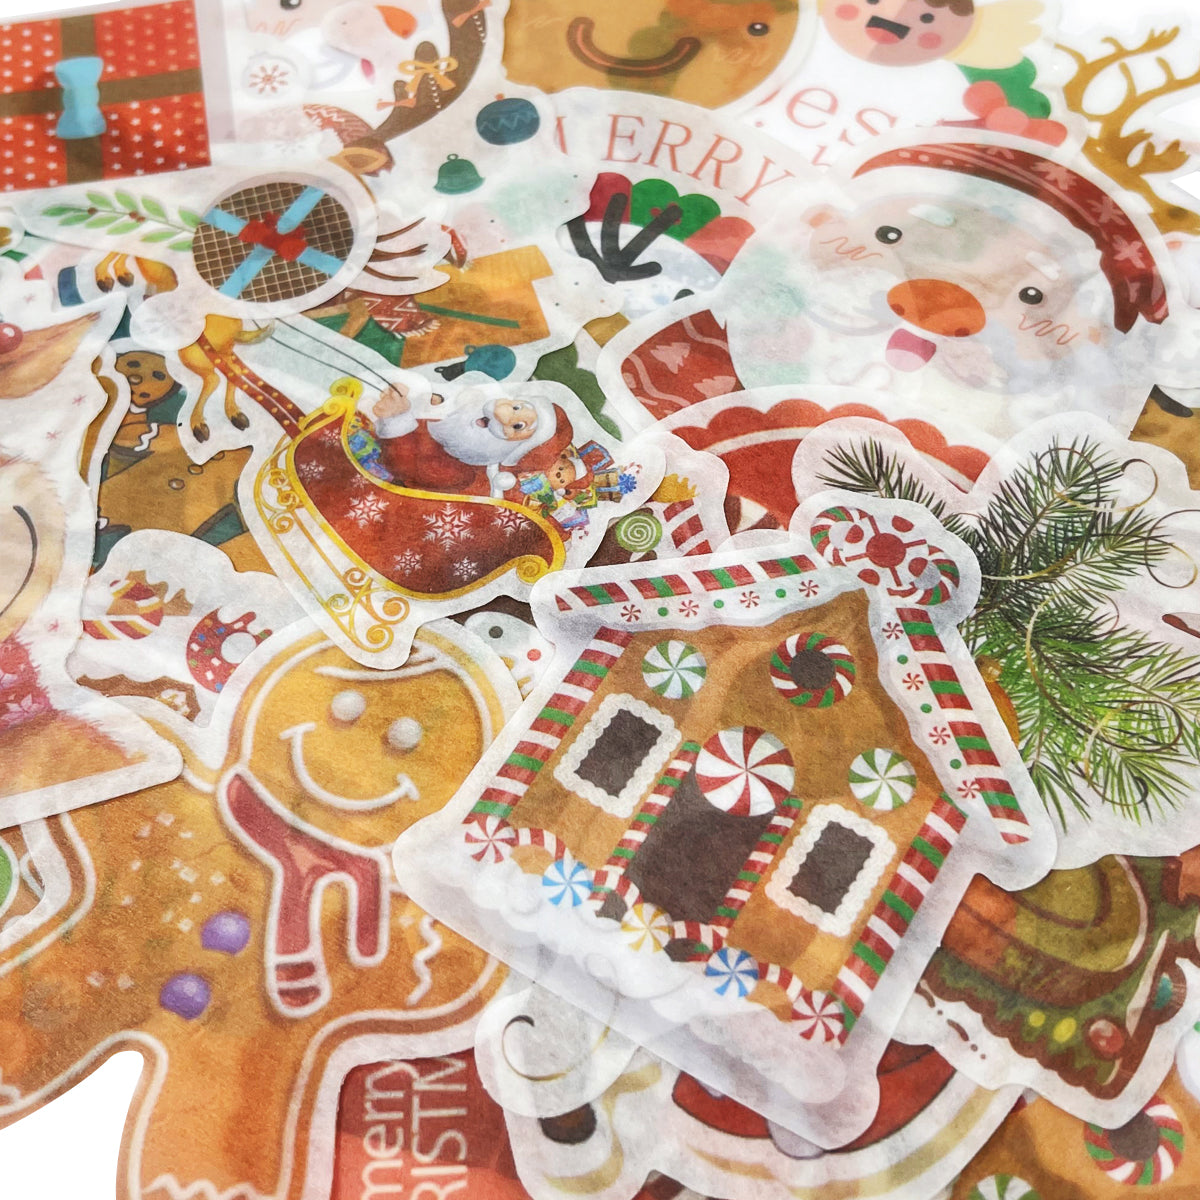 Wrapables Holiday Scrapbooking Washi Stickers for Card Making